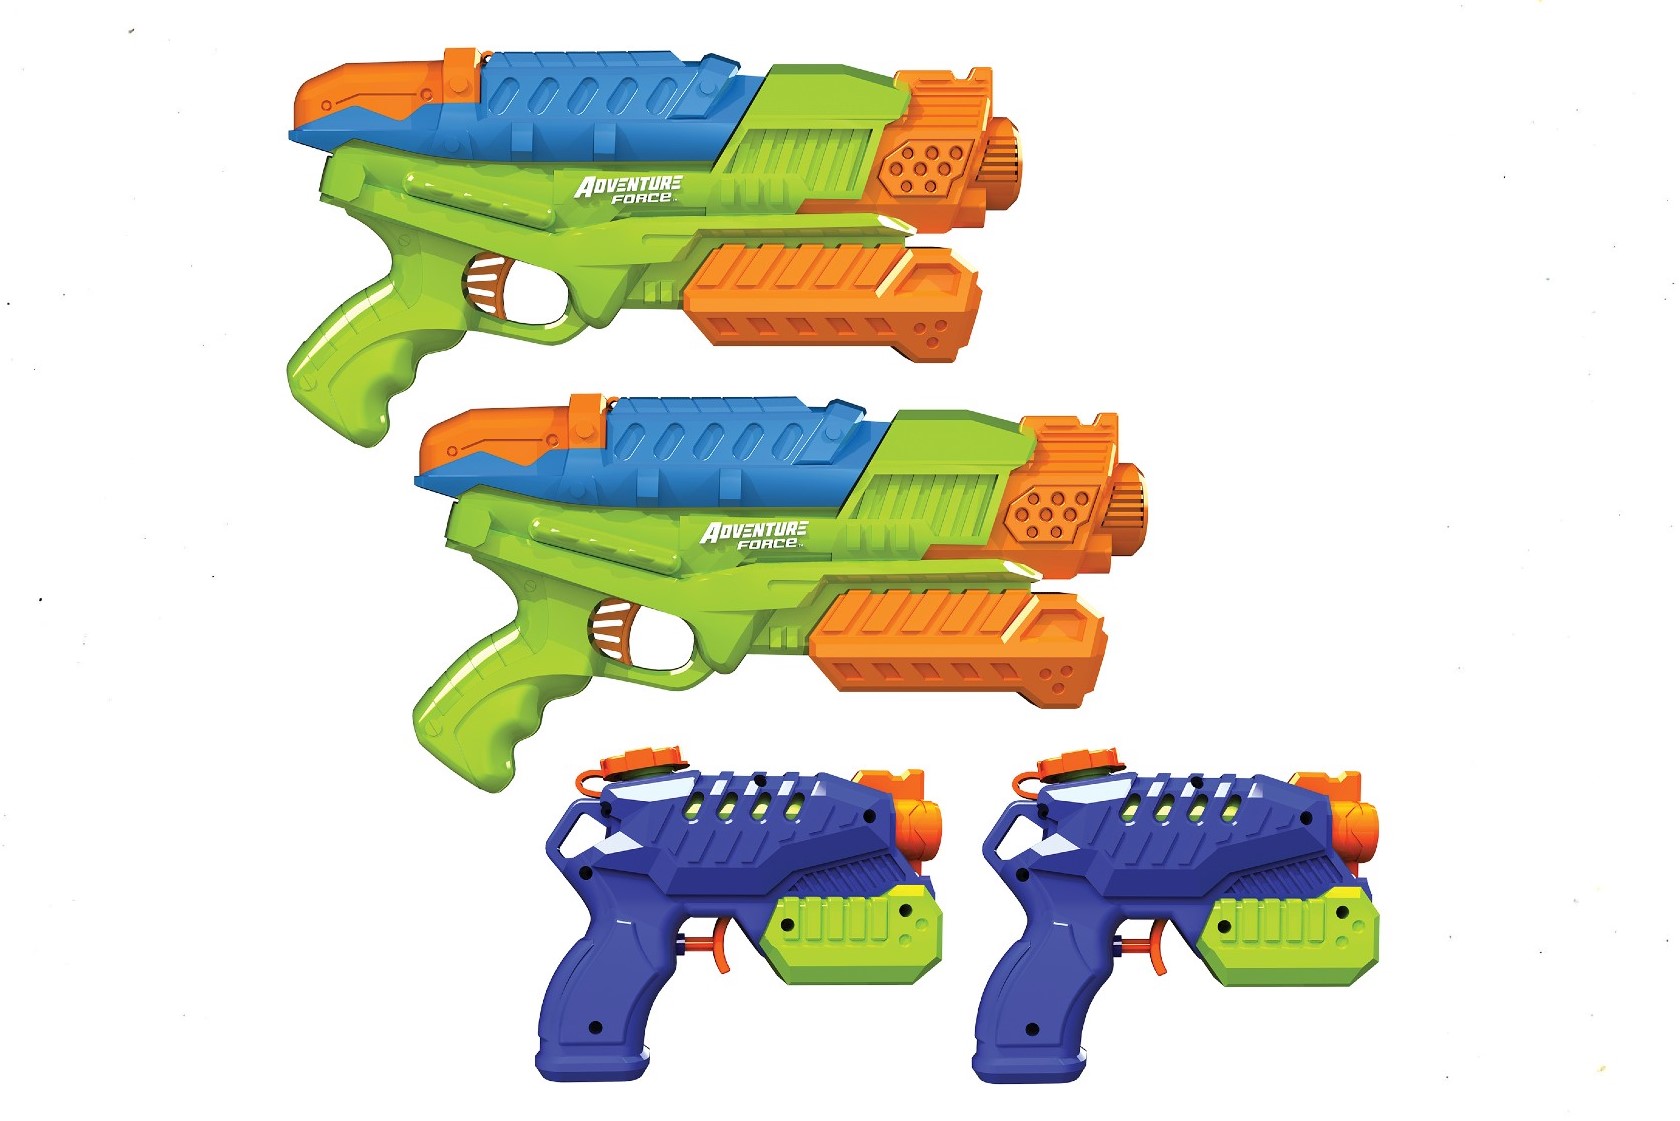 SpyraTwo Spyra Two Water Gun Dual Pack BLUE + RED – Gadget Station